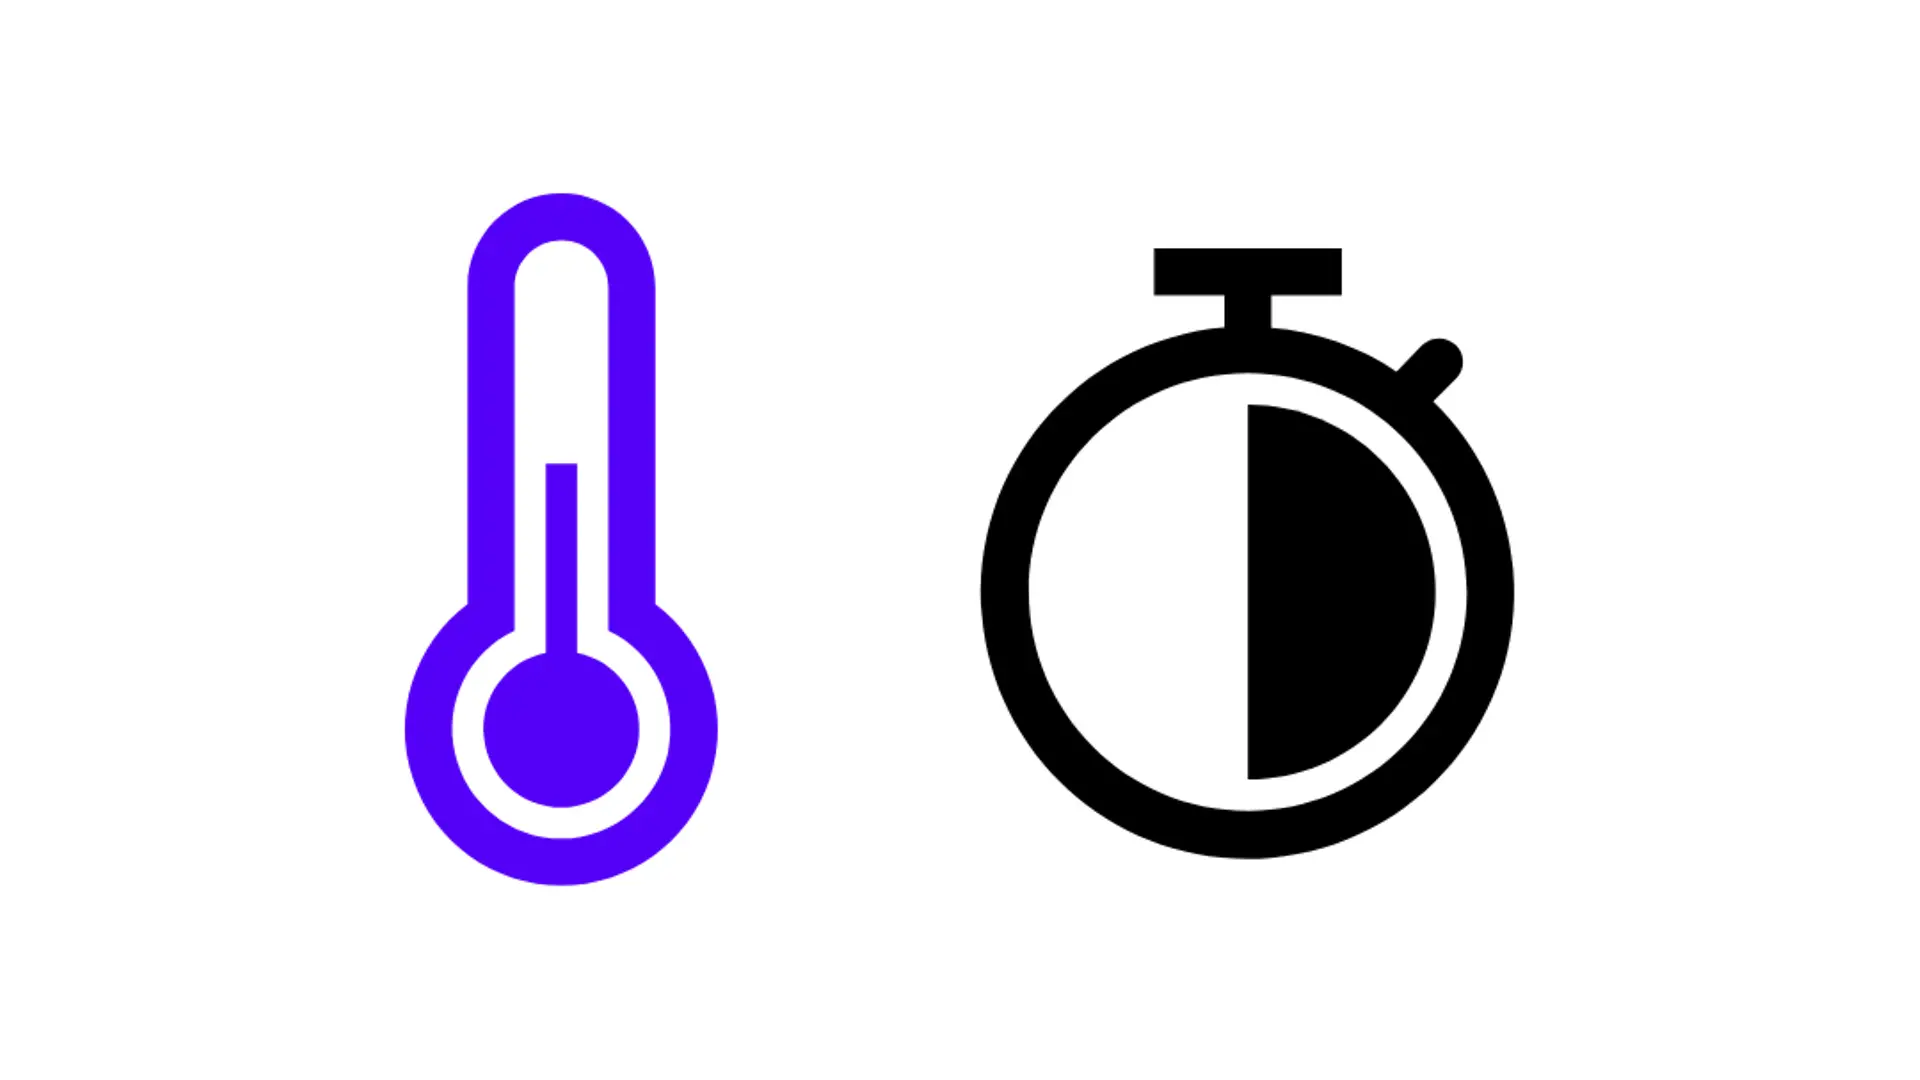 blue symbol for thermometer and clock symbol, half an hour